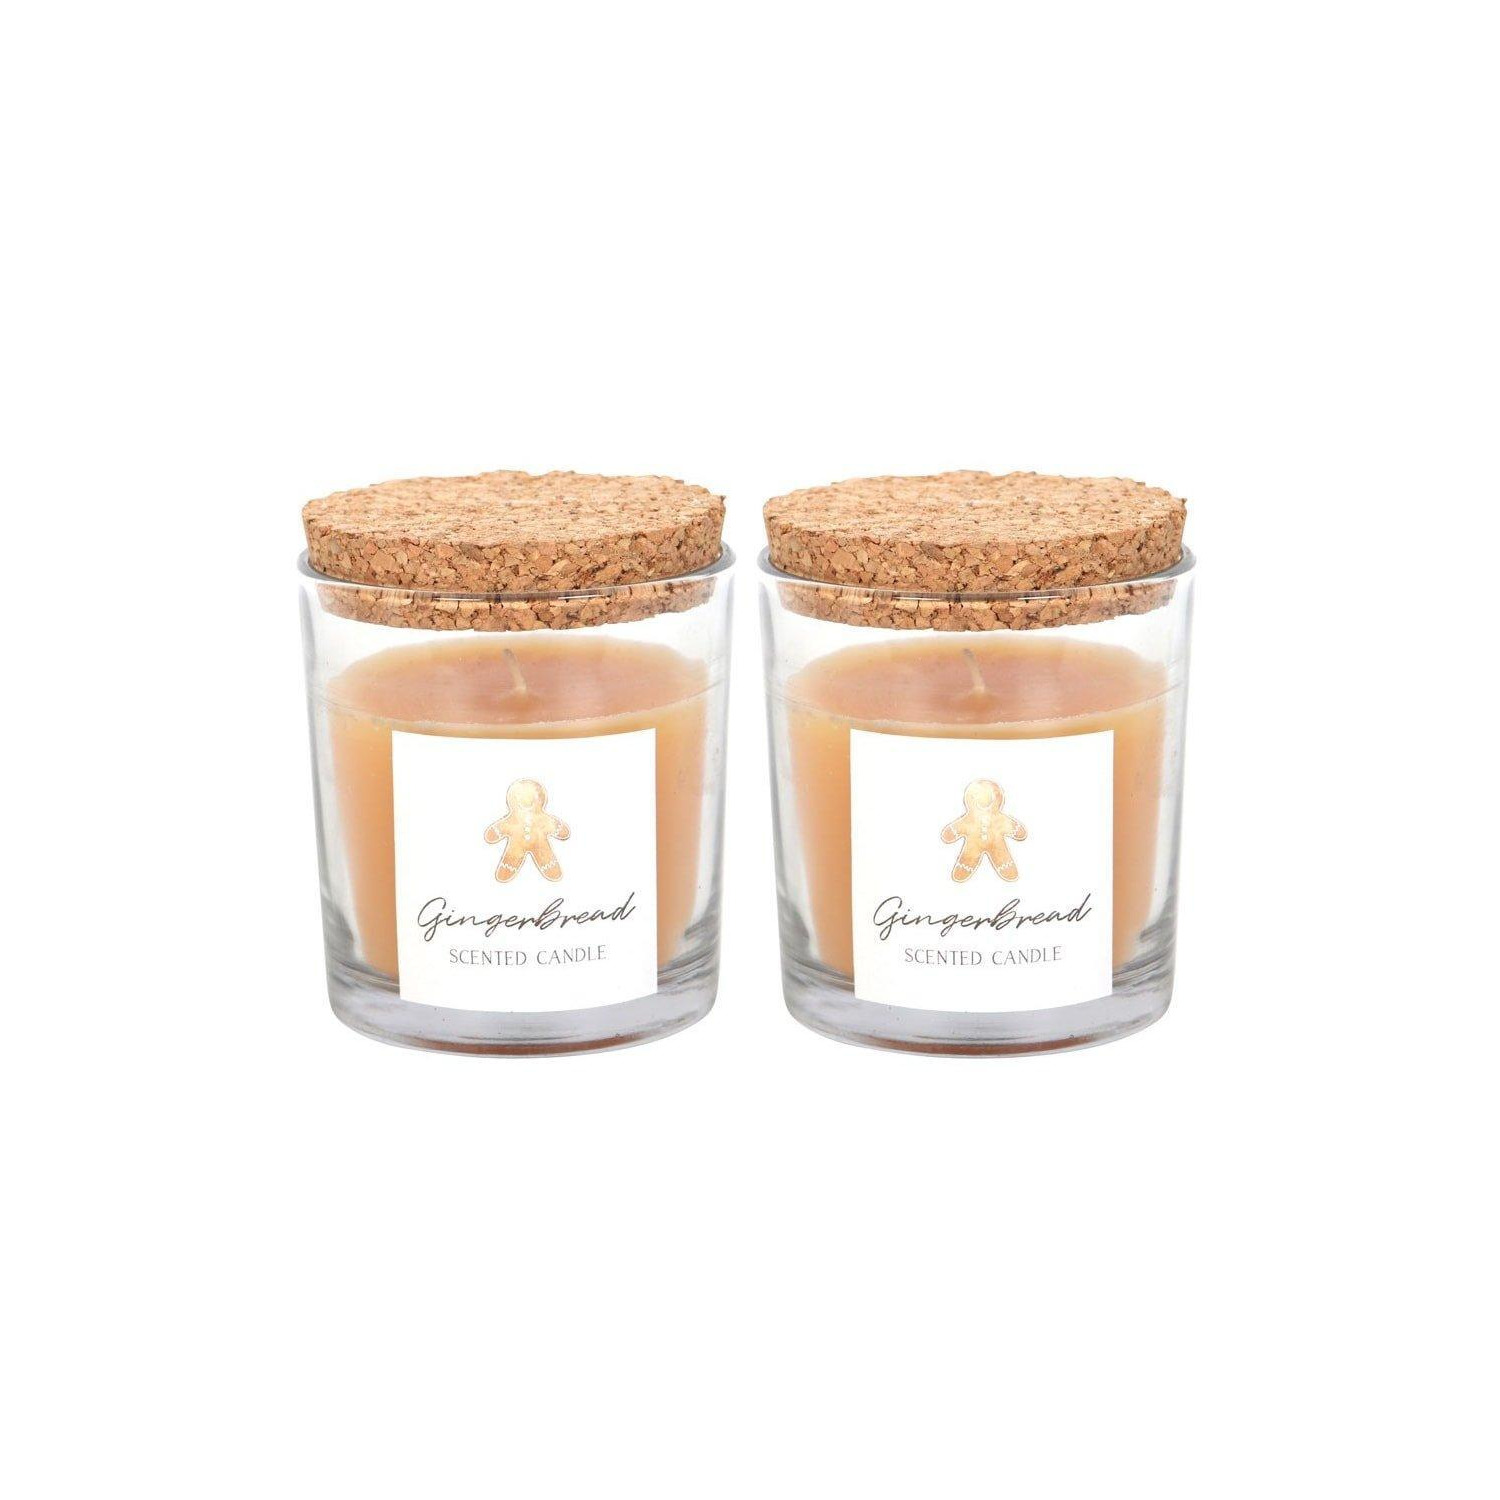 Gingerbread Scented Candle Pack of 2 - image 1